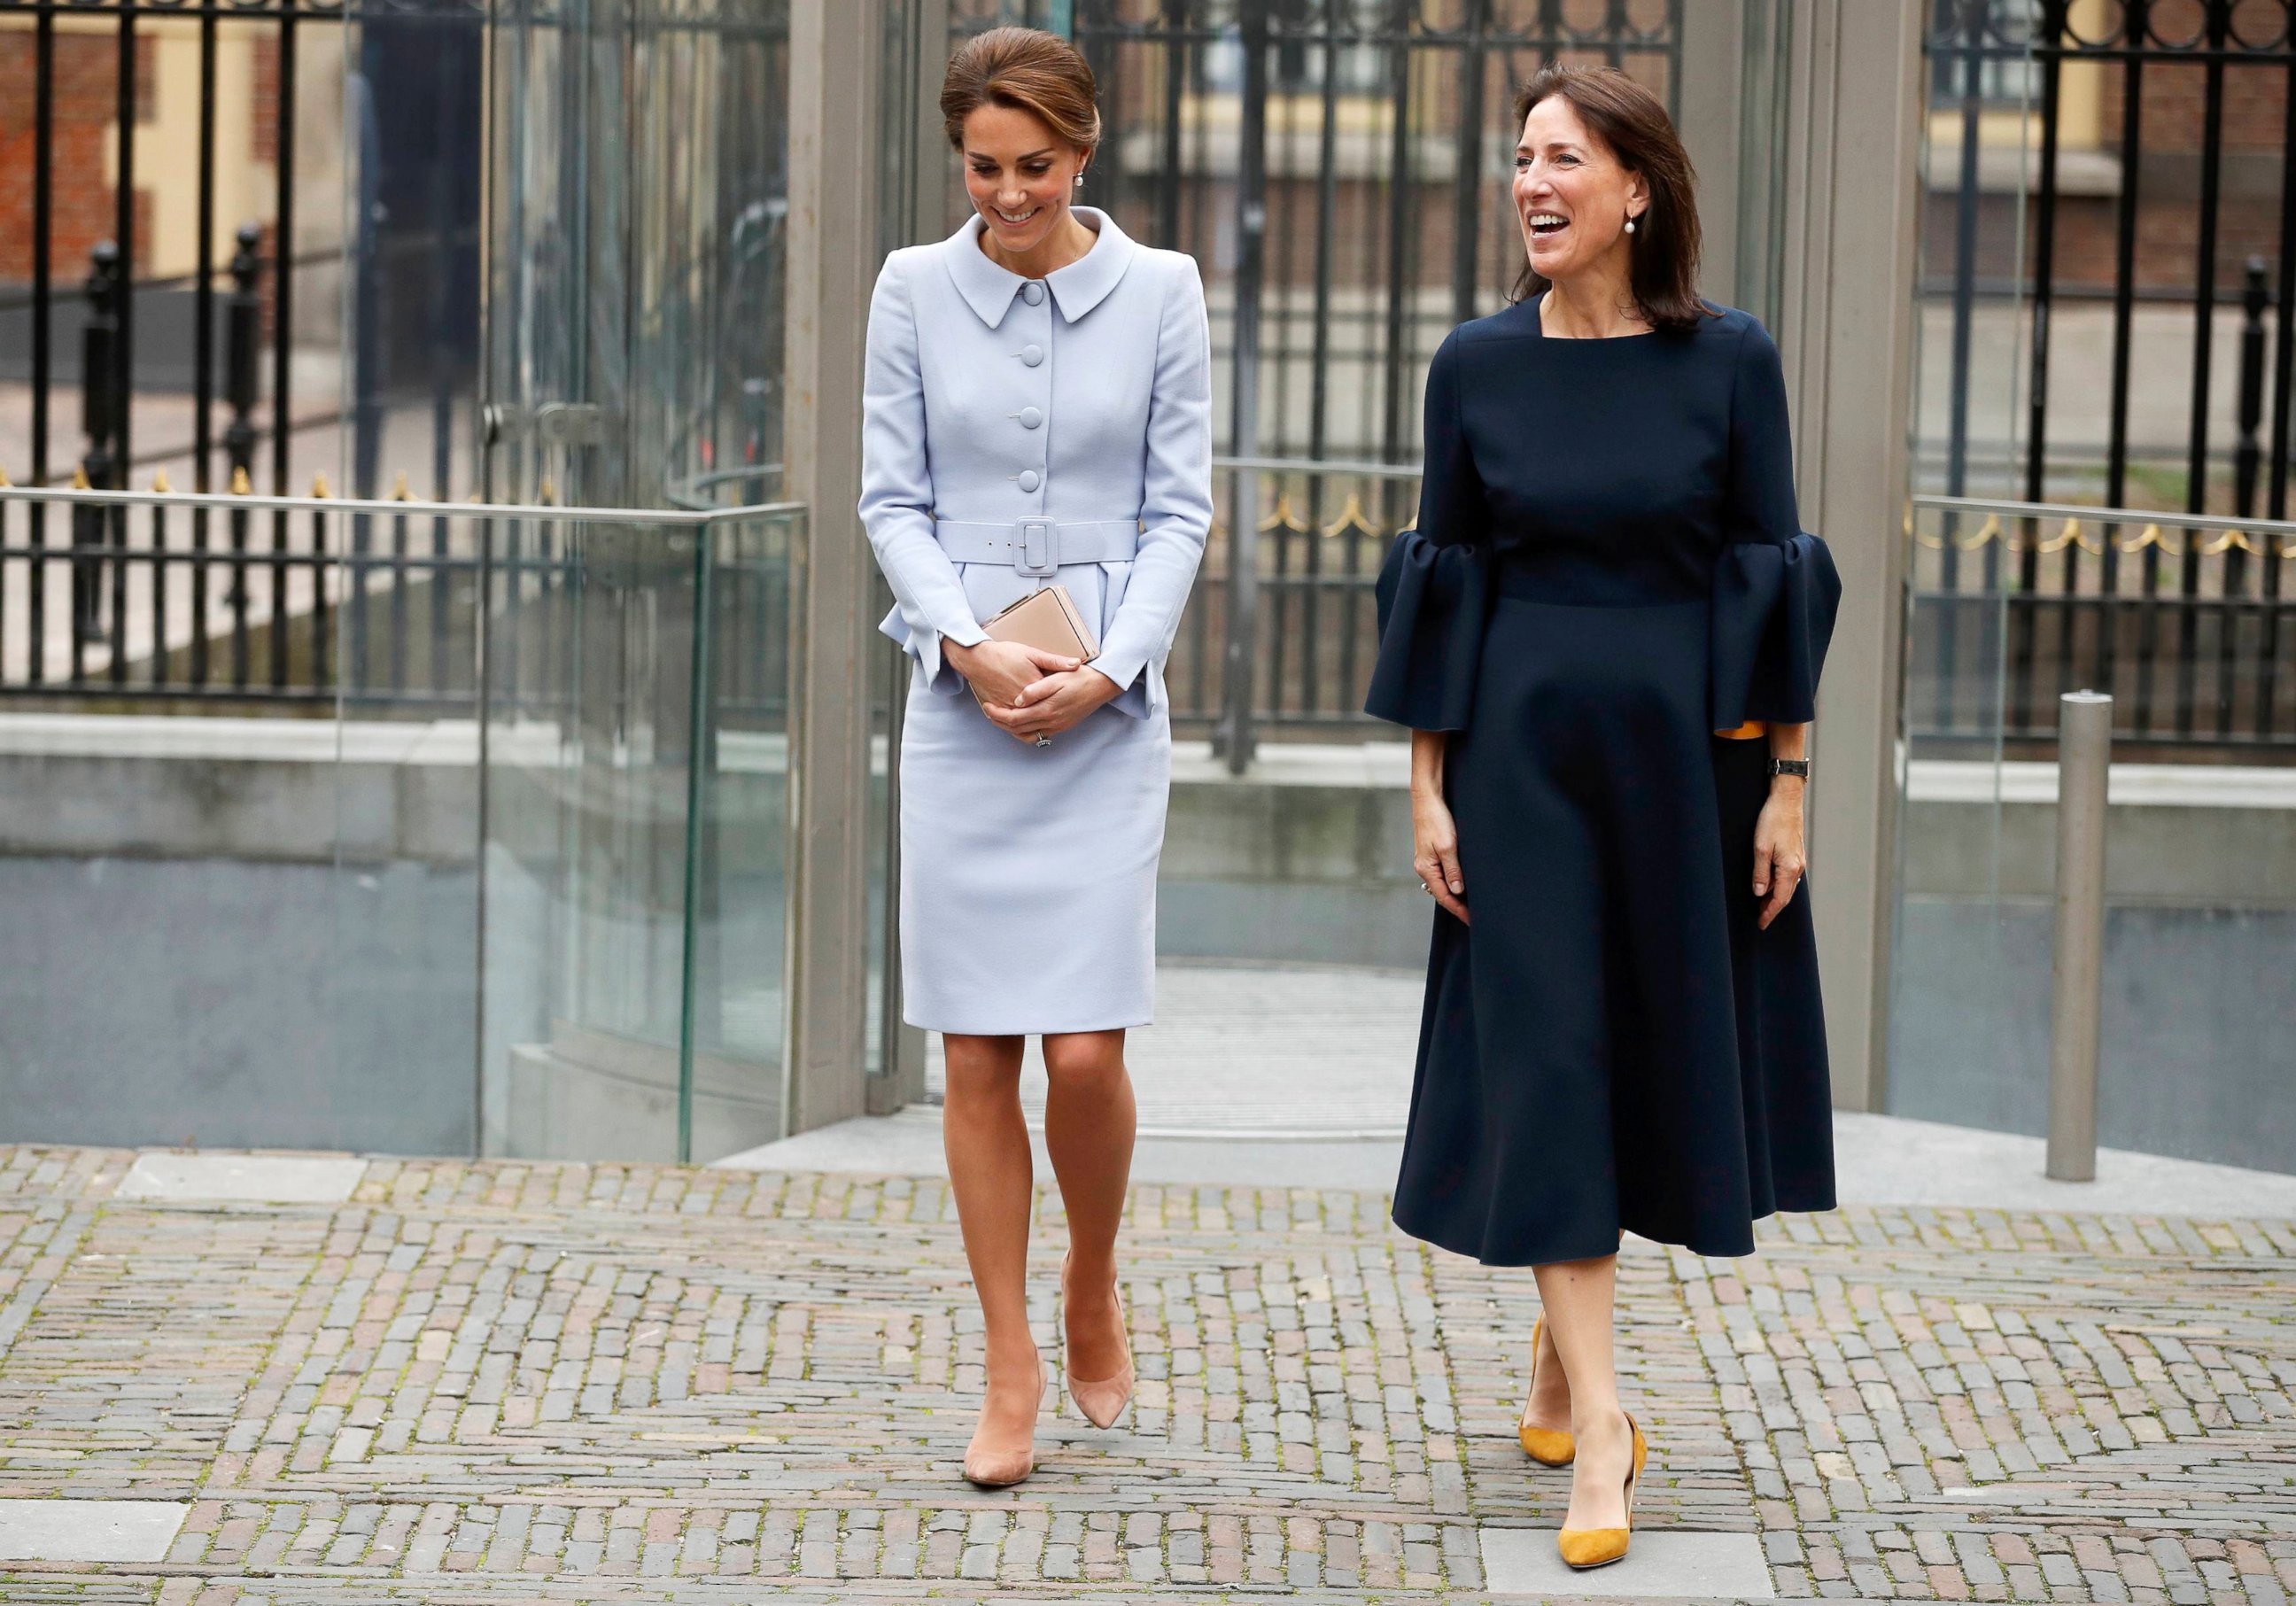 PHOTO: Britain's Catherine, Duchess of Cambridge, leaves with museum director Emilie Gordenke after viewing the exhibition "At Home in Holland: Vermeer and his Contemporaries from the British Royal Collection" in the Hague, the Netherlands, Oct. 11, 2016.